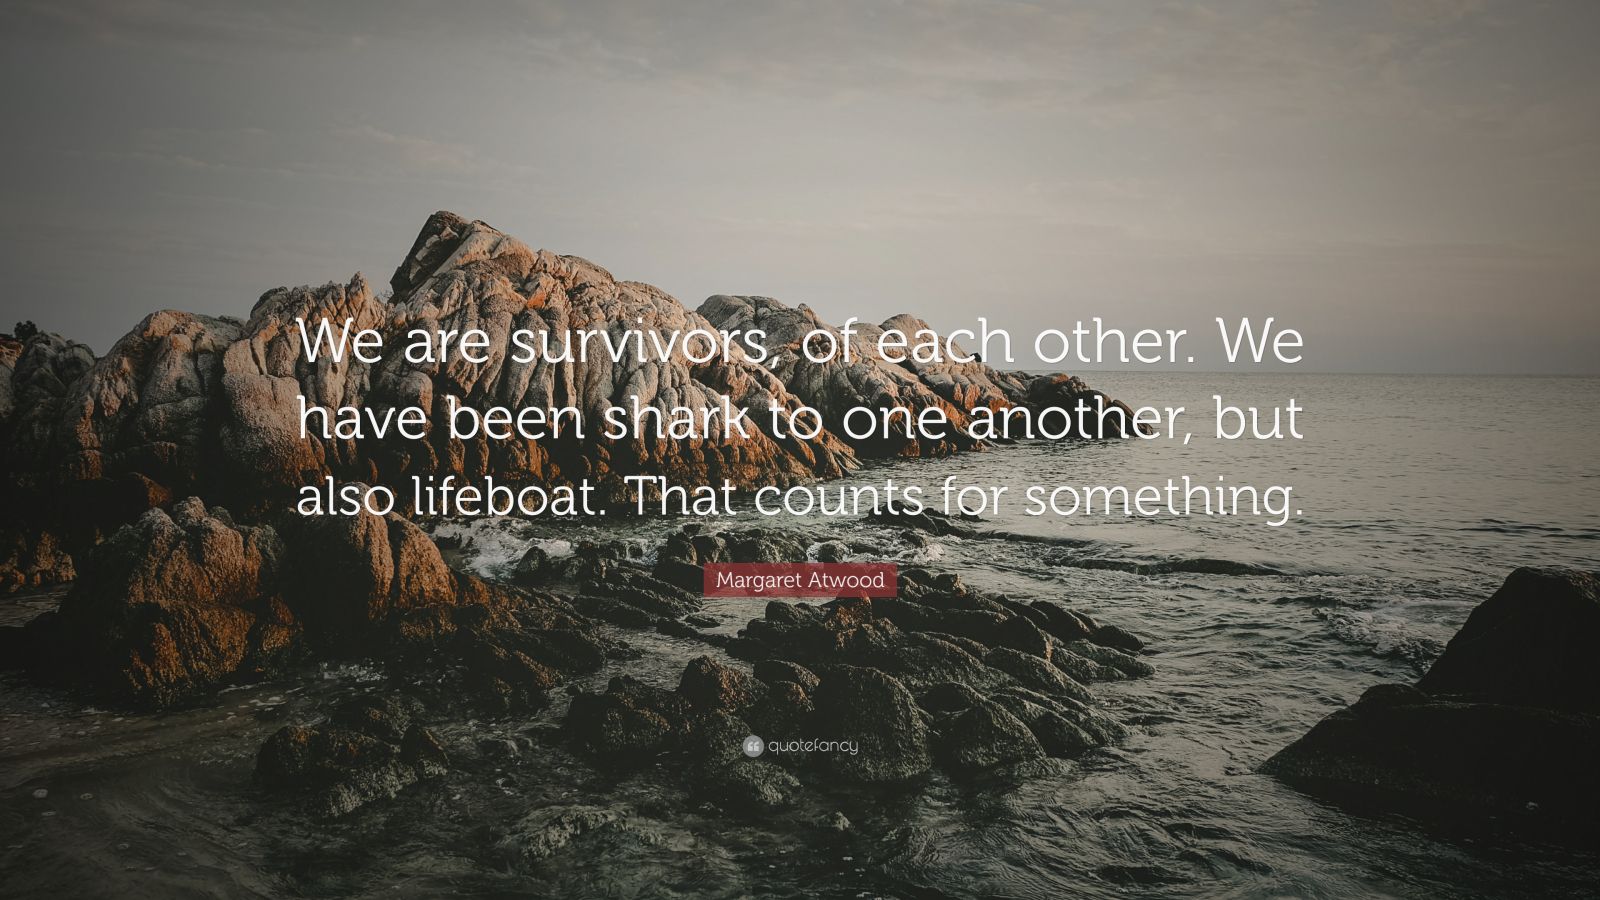 Margaret Atwood Quote: “We are survivors, of each other. We have been ...